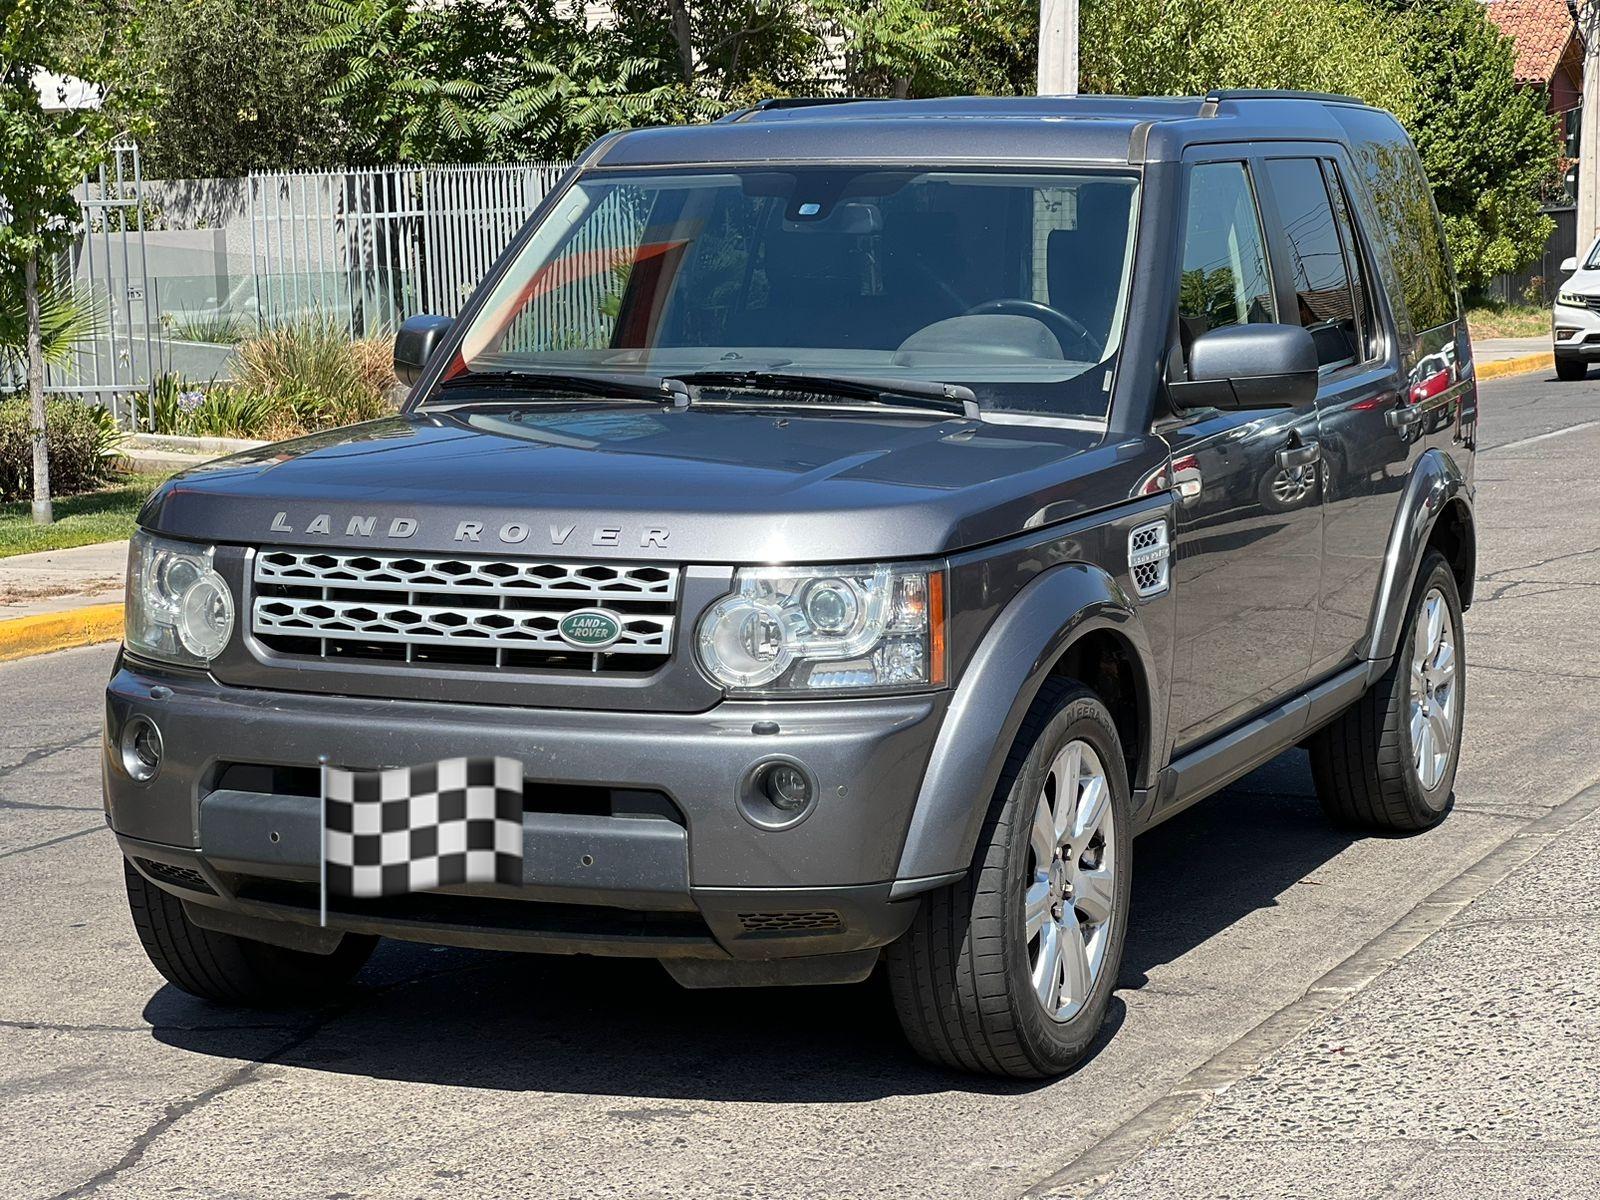 LAND ROVER DISCOVERY DISCOVERY 4 3.0CC SE DIESEL 2014 DISCOVERY 4 3.0 SE DIESEL 2 CORRIDAS DE ASIENTOS - FULL MOTOR